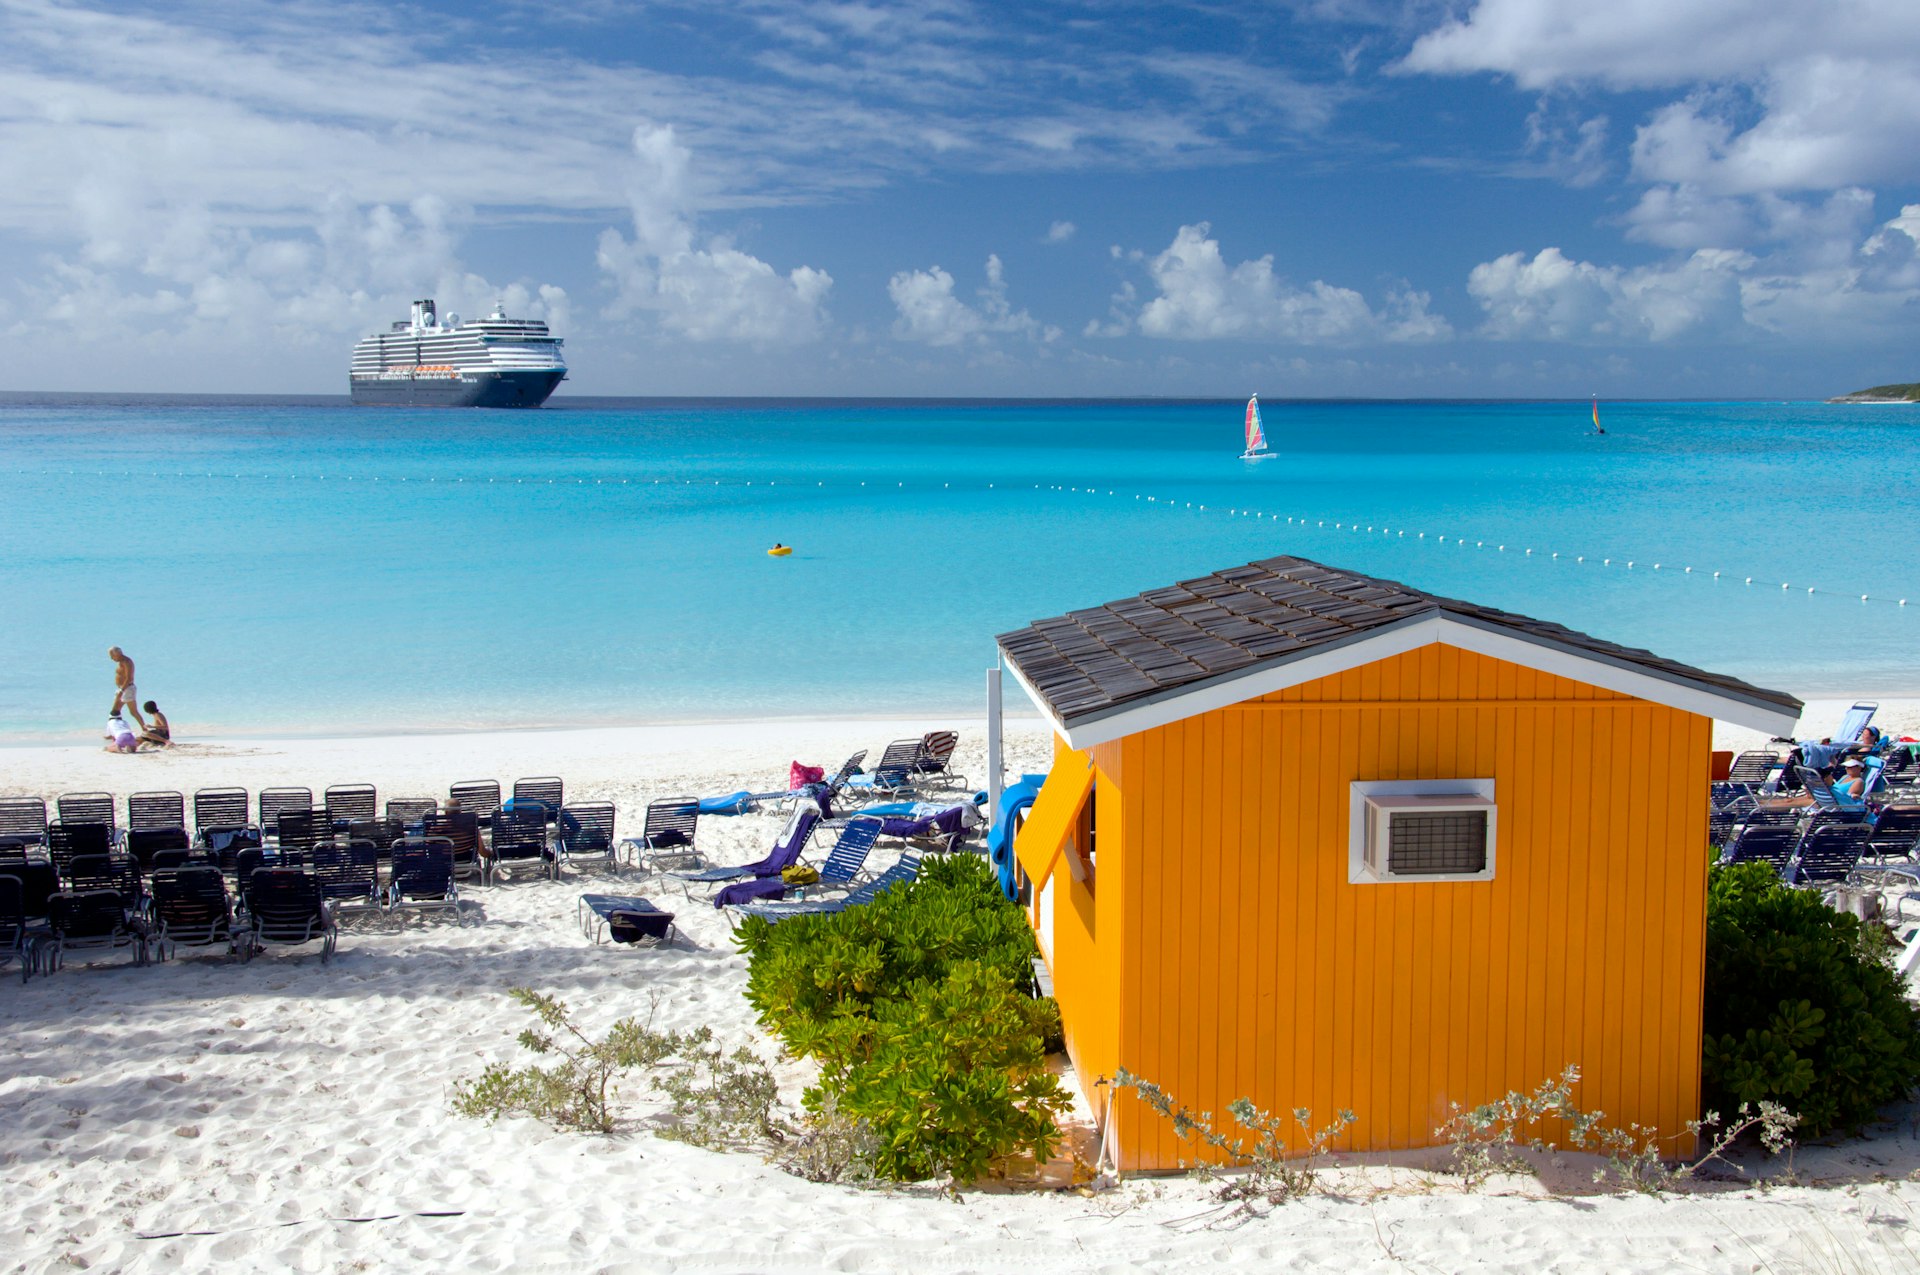 A colorful beach cabana with the Holland America cruise ship Westerdam Bahamas. Image shot 2008. Exact date unknown.